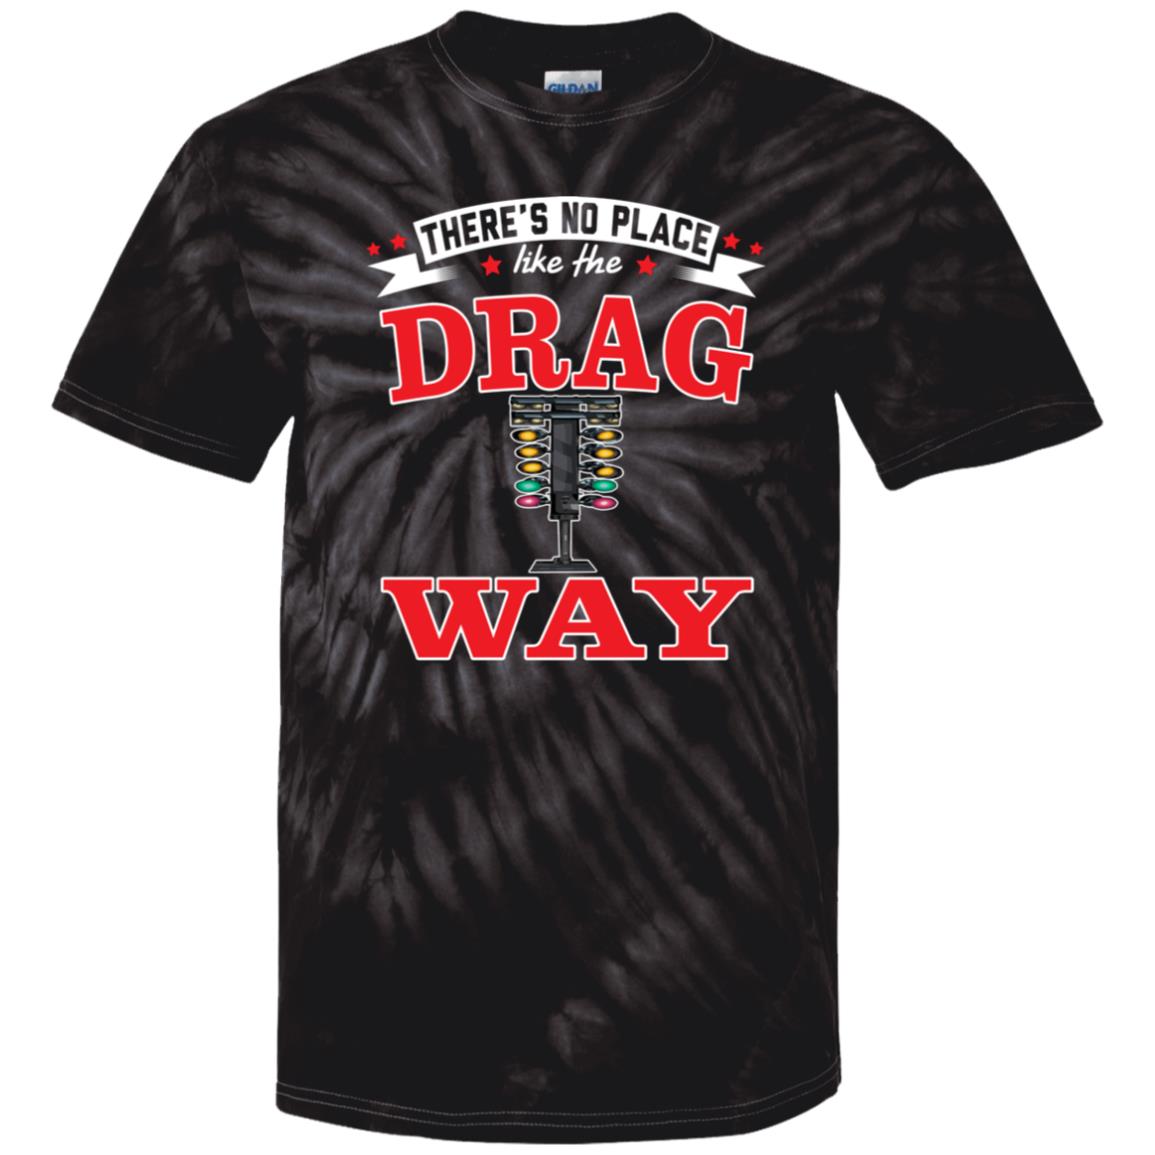 There's No Place Like The Dragway 100% Cotton Tie Dye T-Shirt